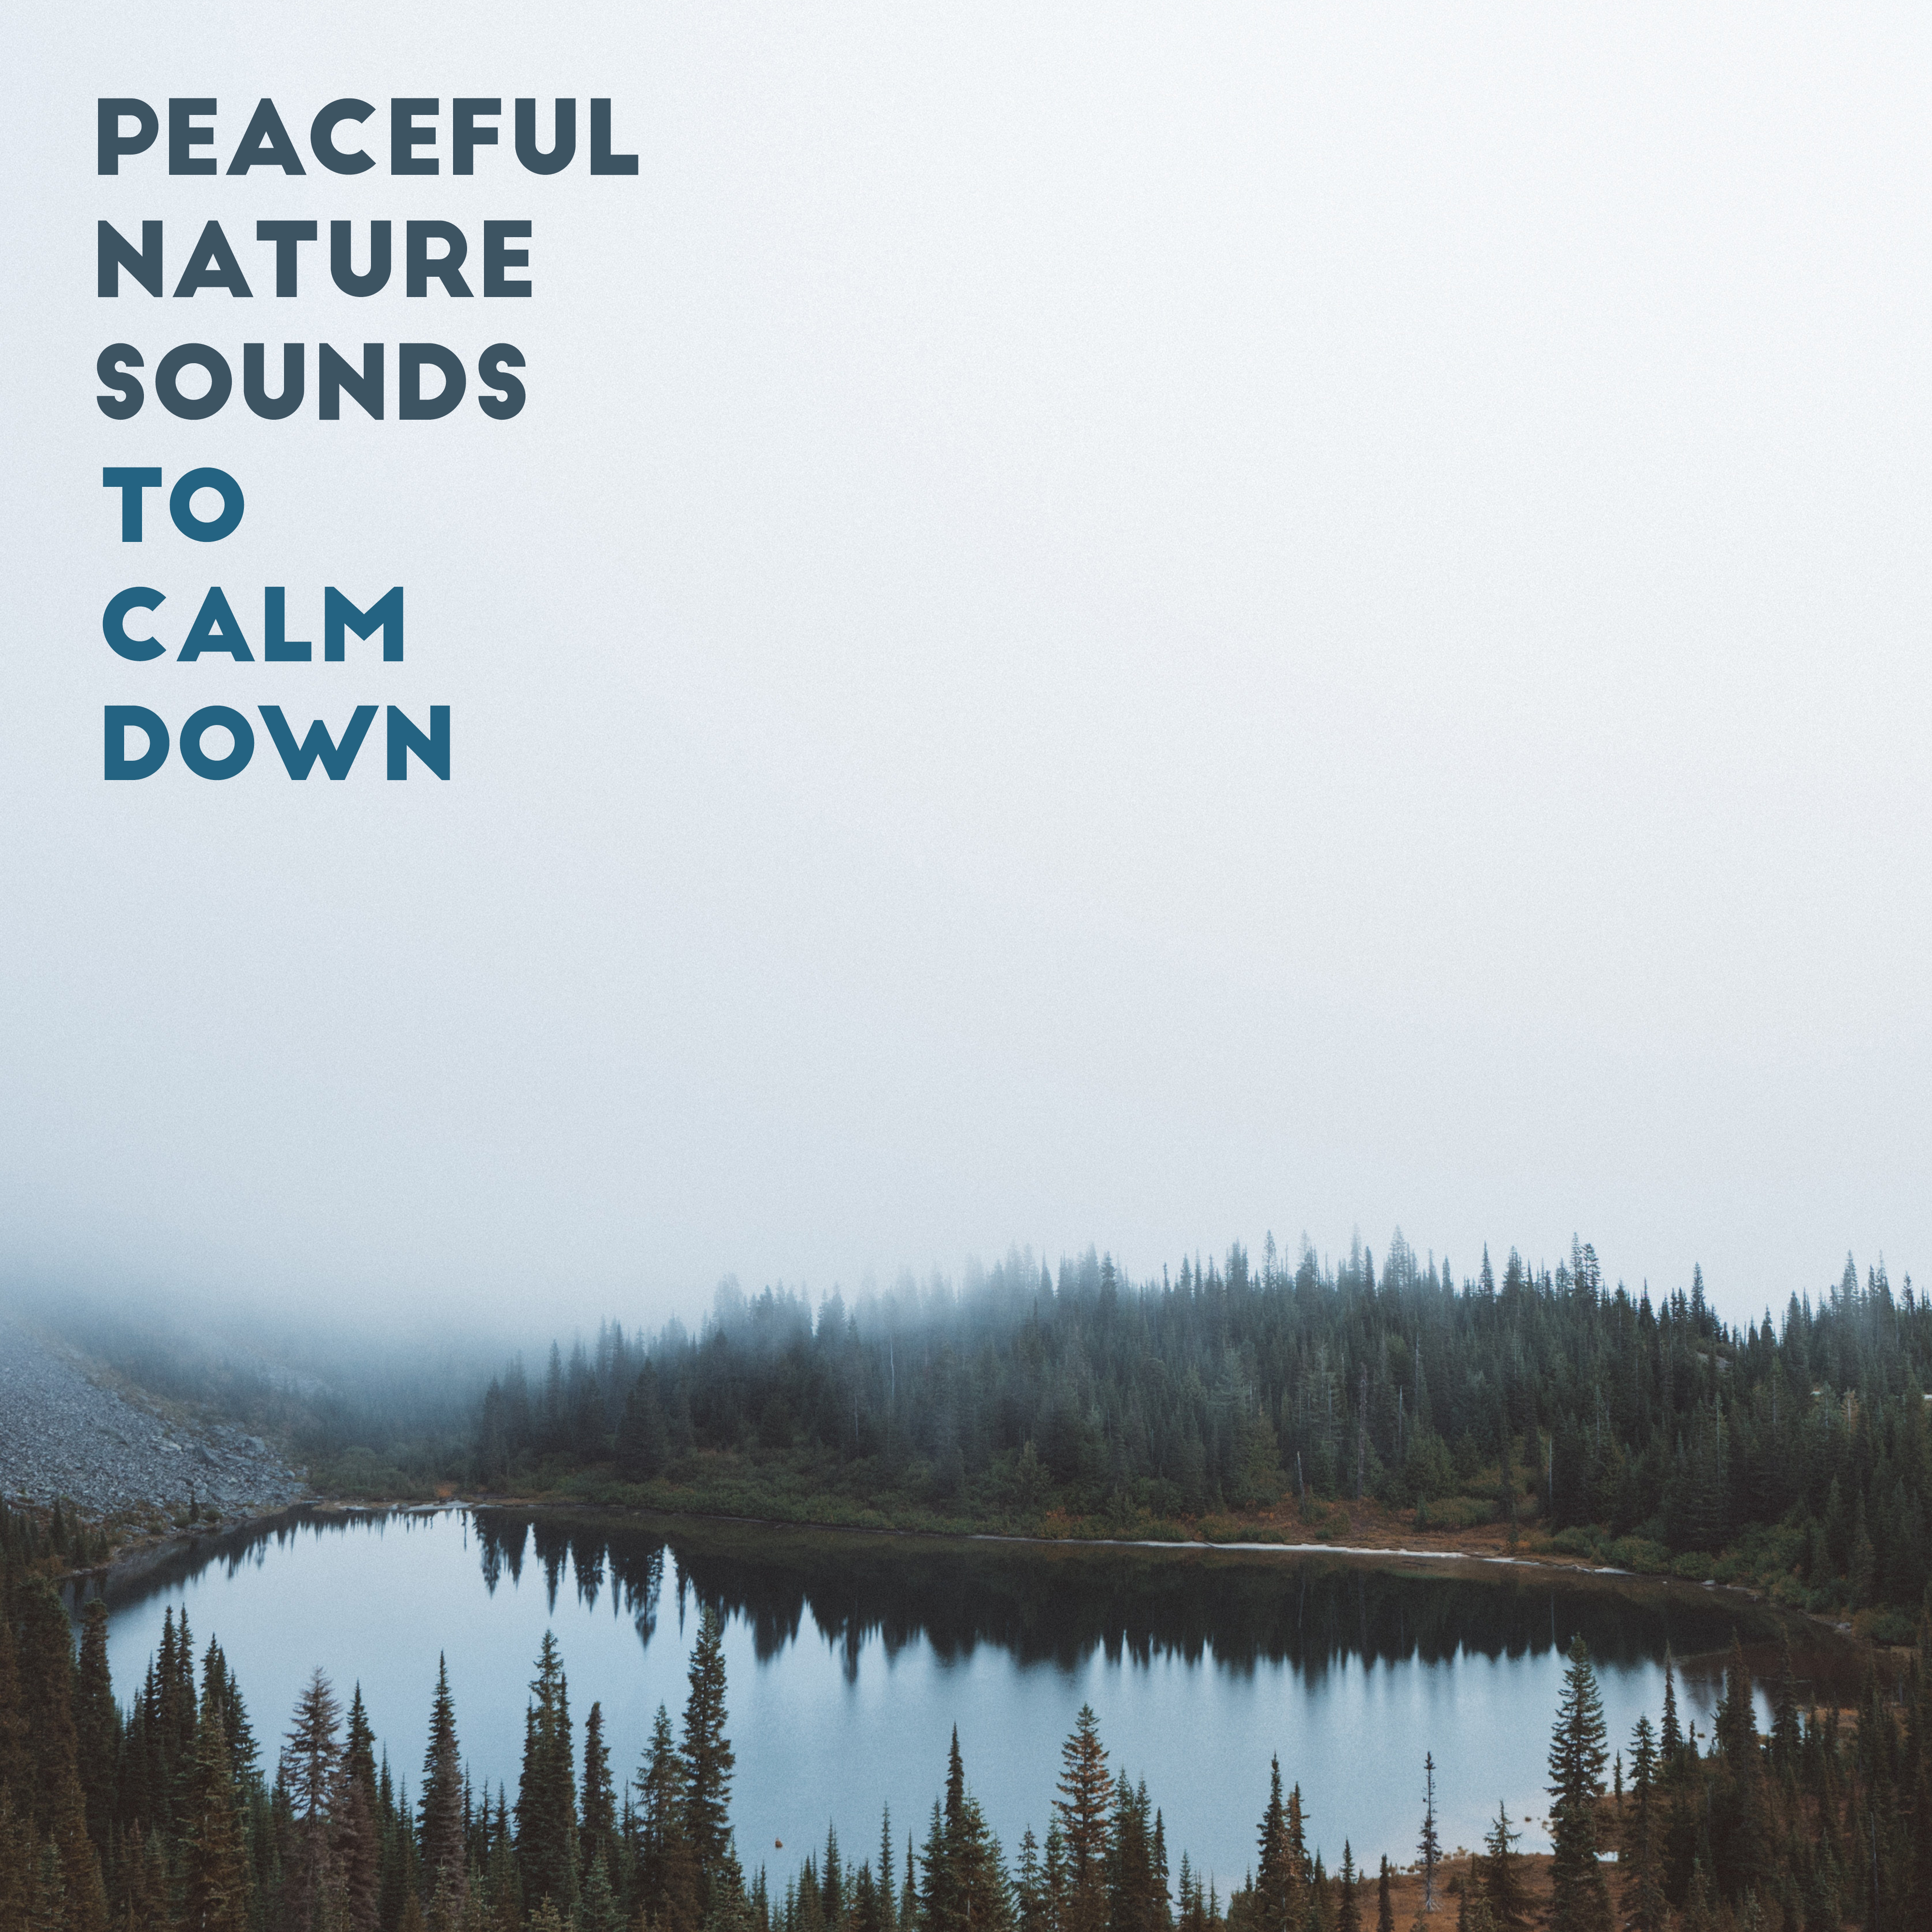 Peaceful Nature Sounds to Calm Down